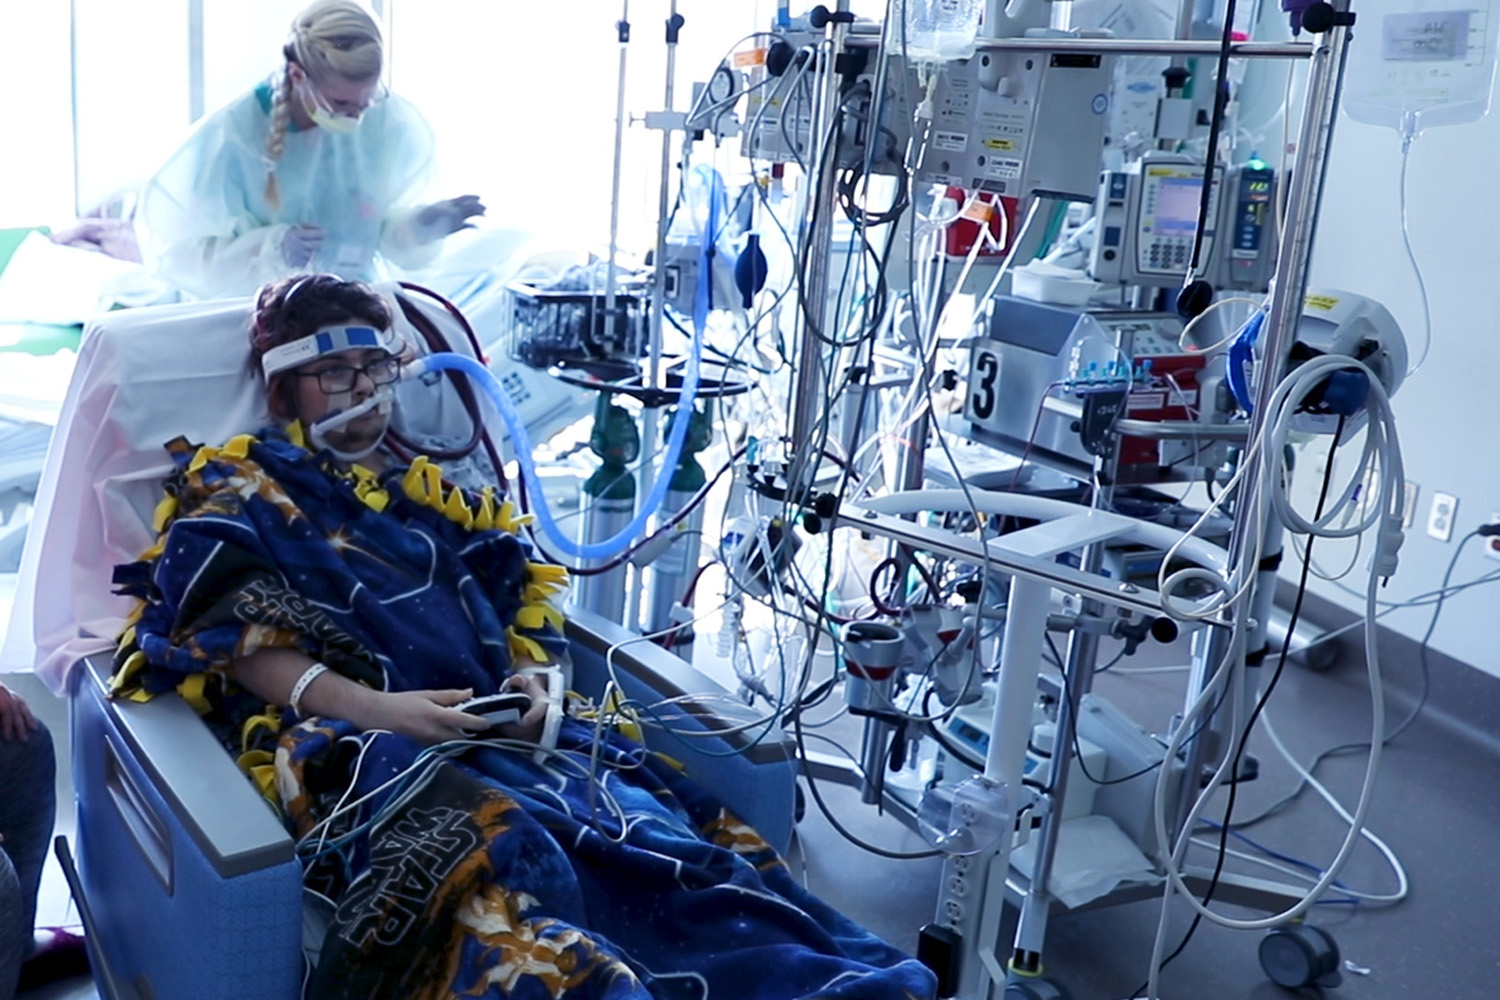 a patient on extracorporeal membrane oxygenation sits in a hospital room